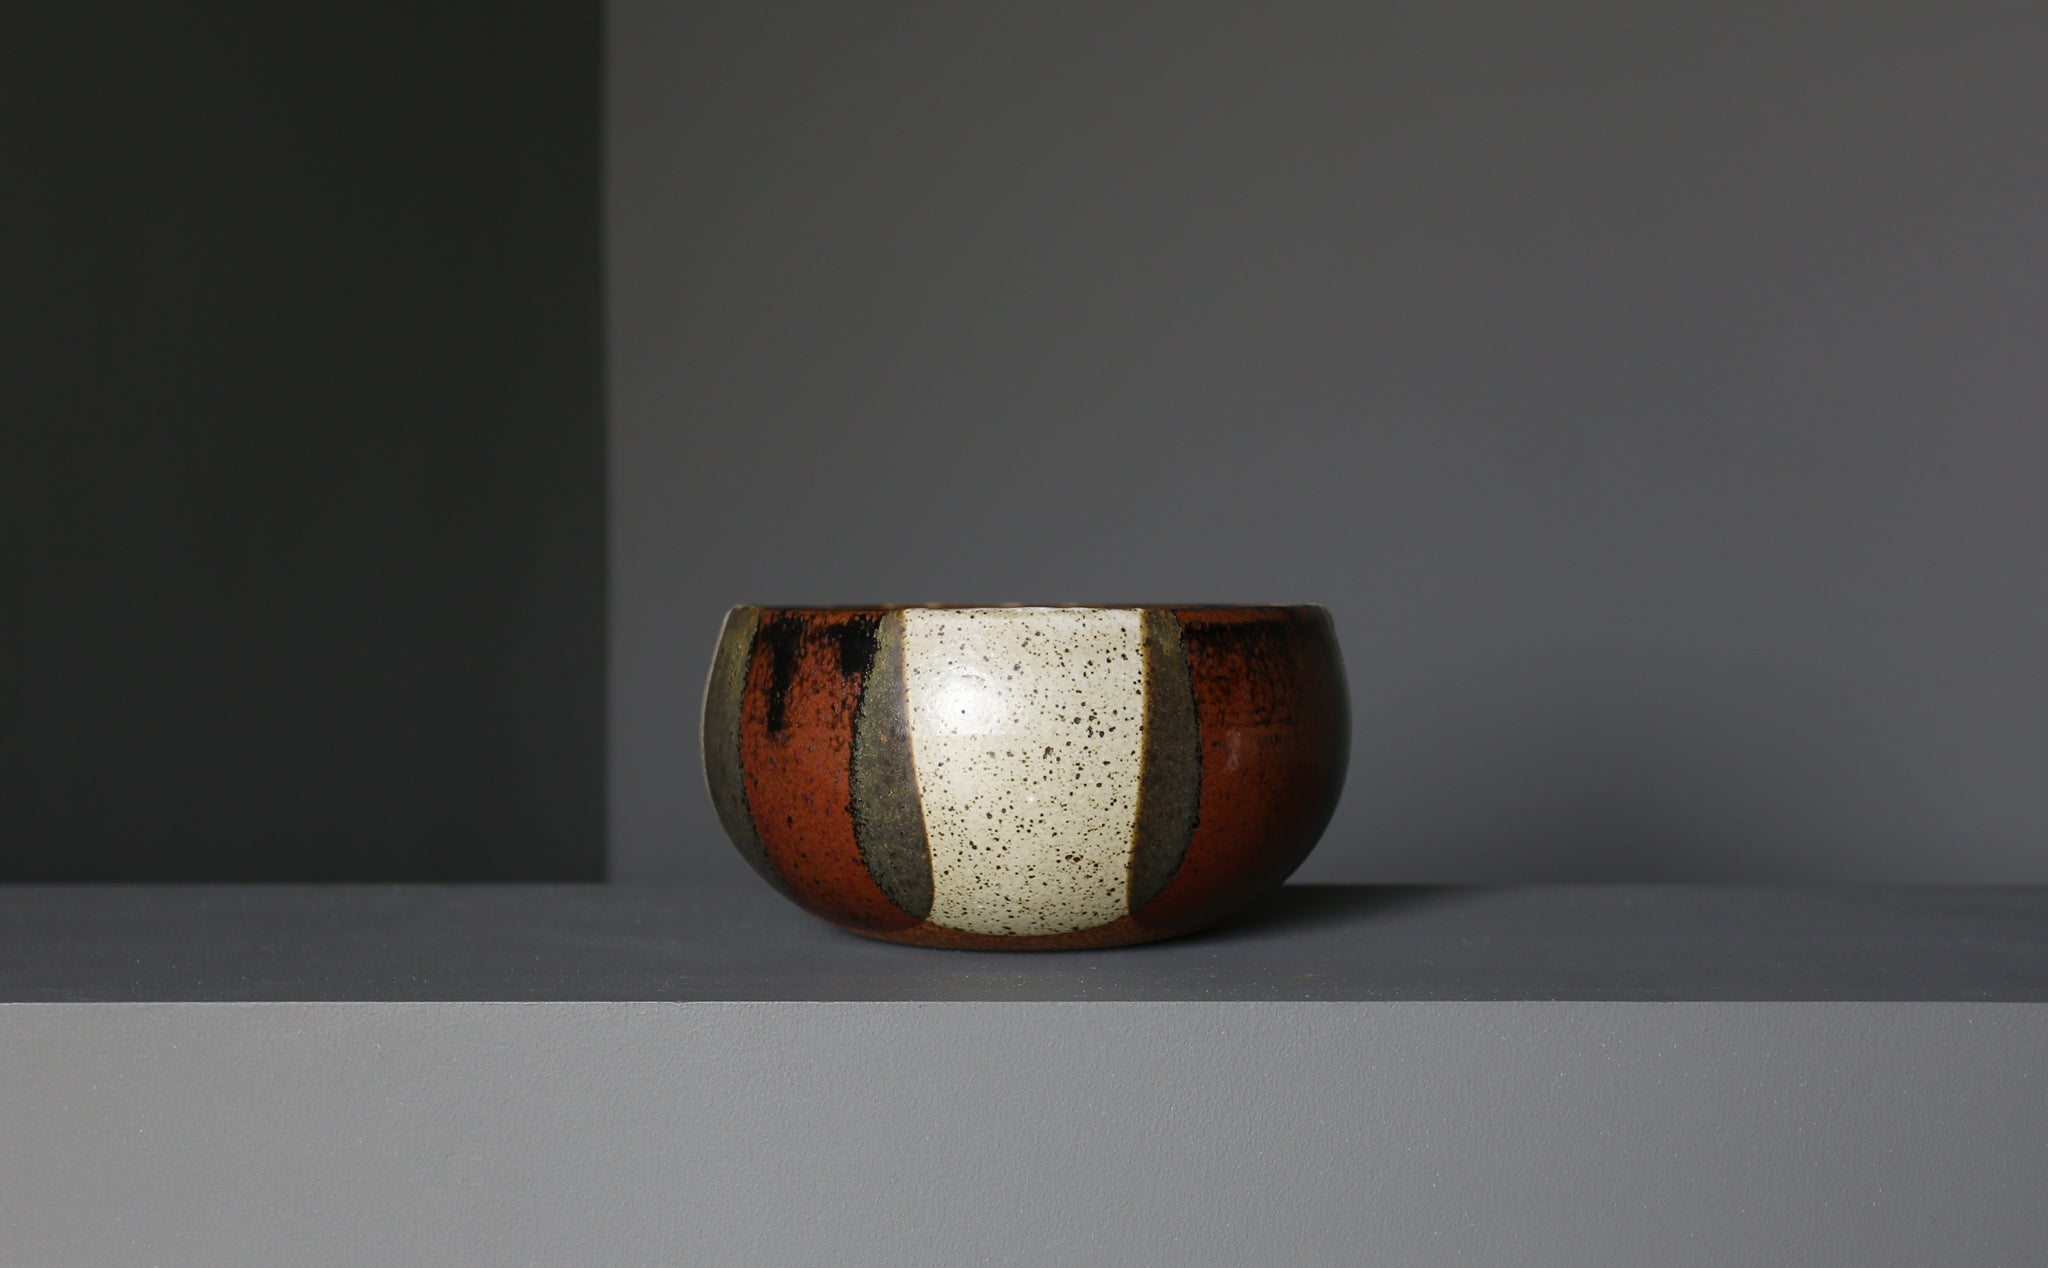 = SOLD = David Cressey "Flame Glaze" Planter for Architectural Pottery, circa 1970